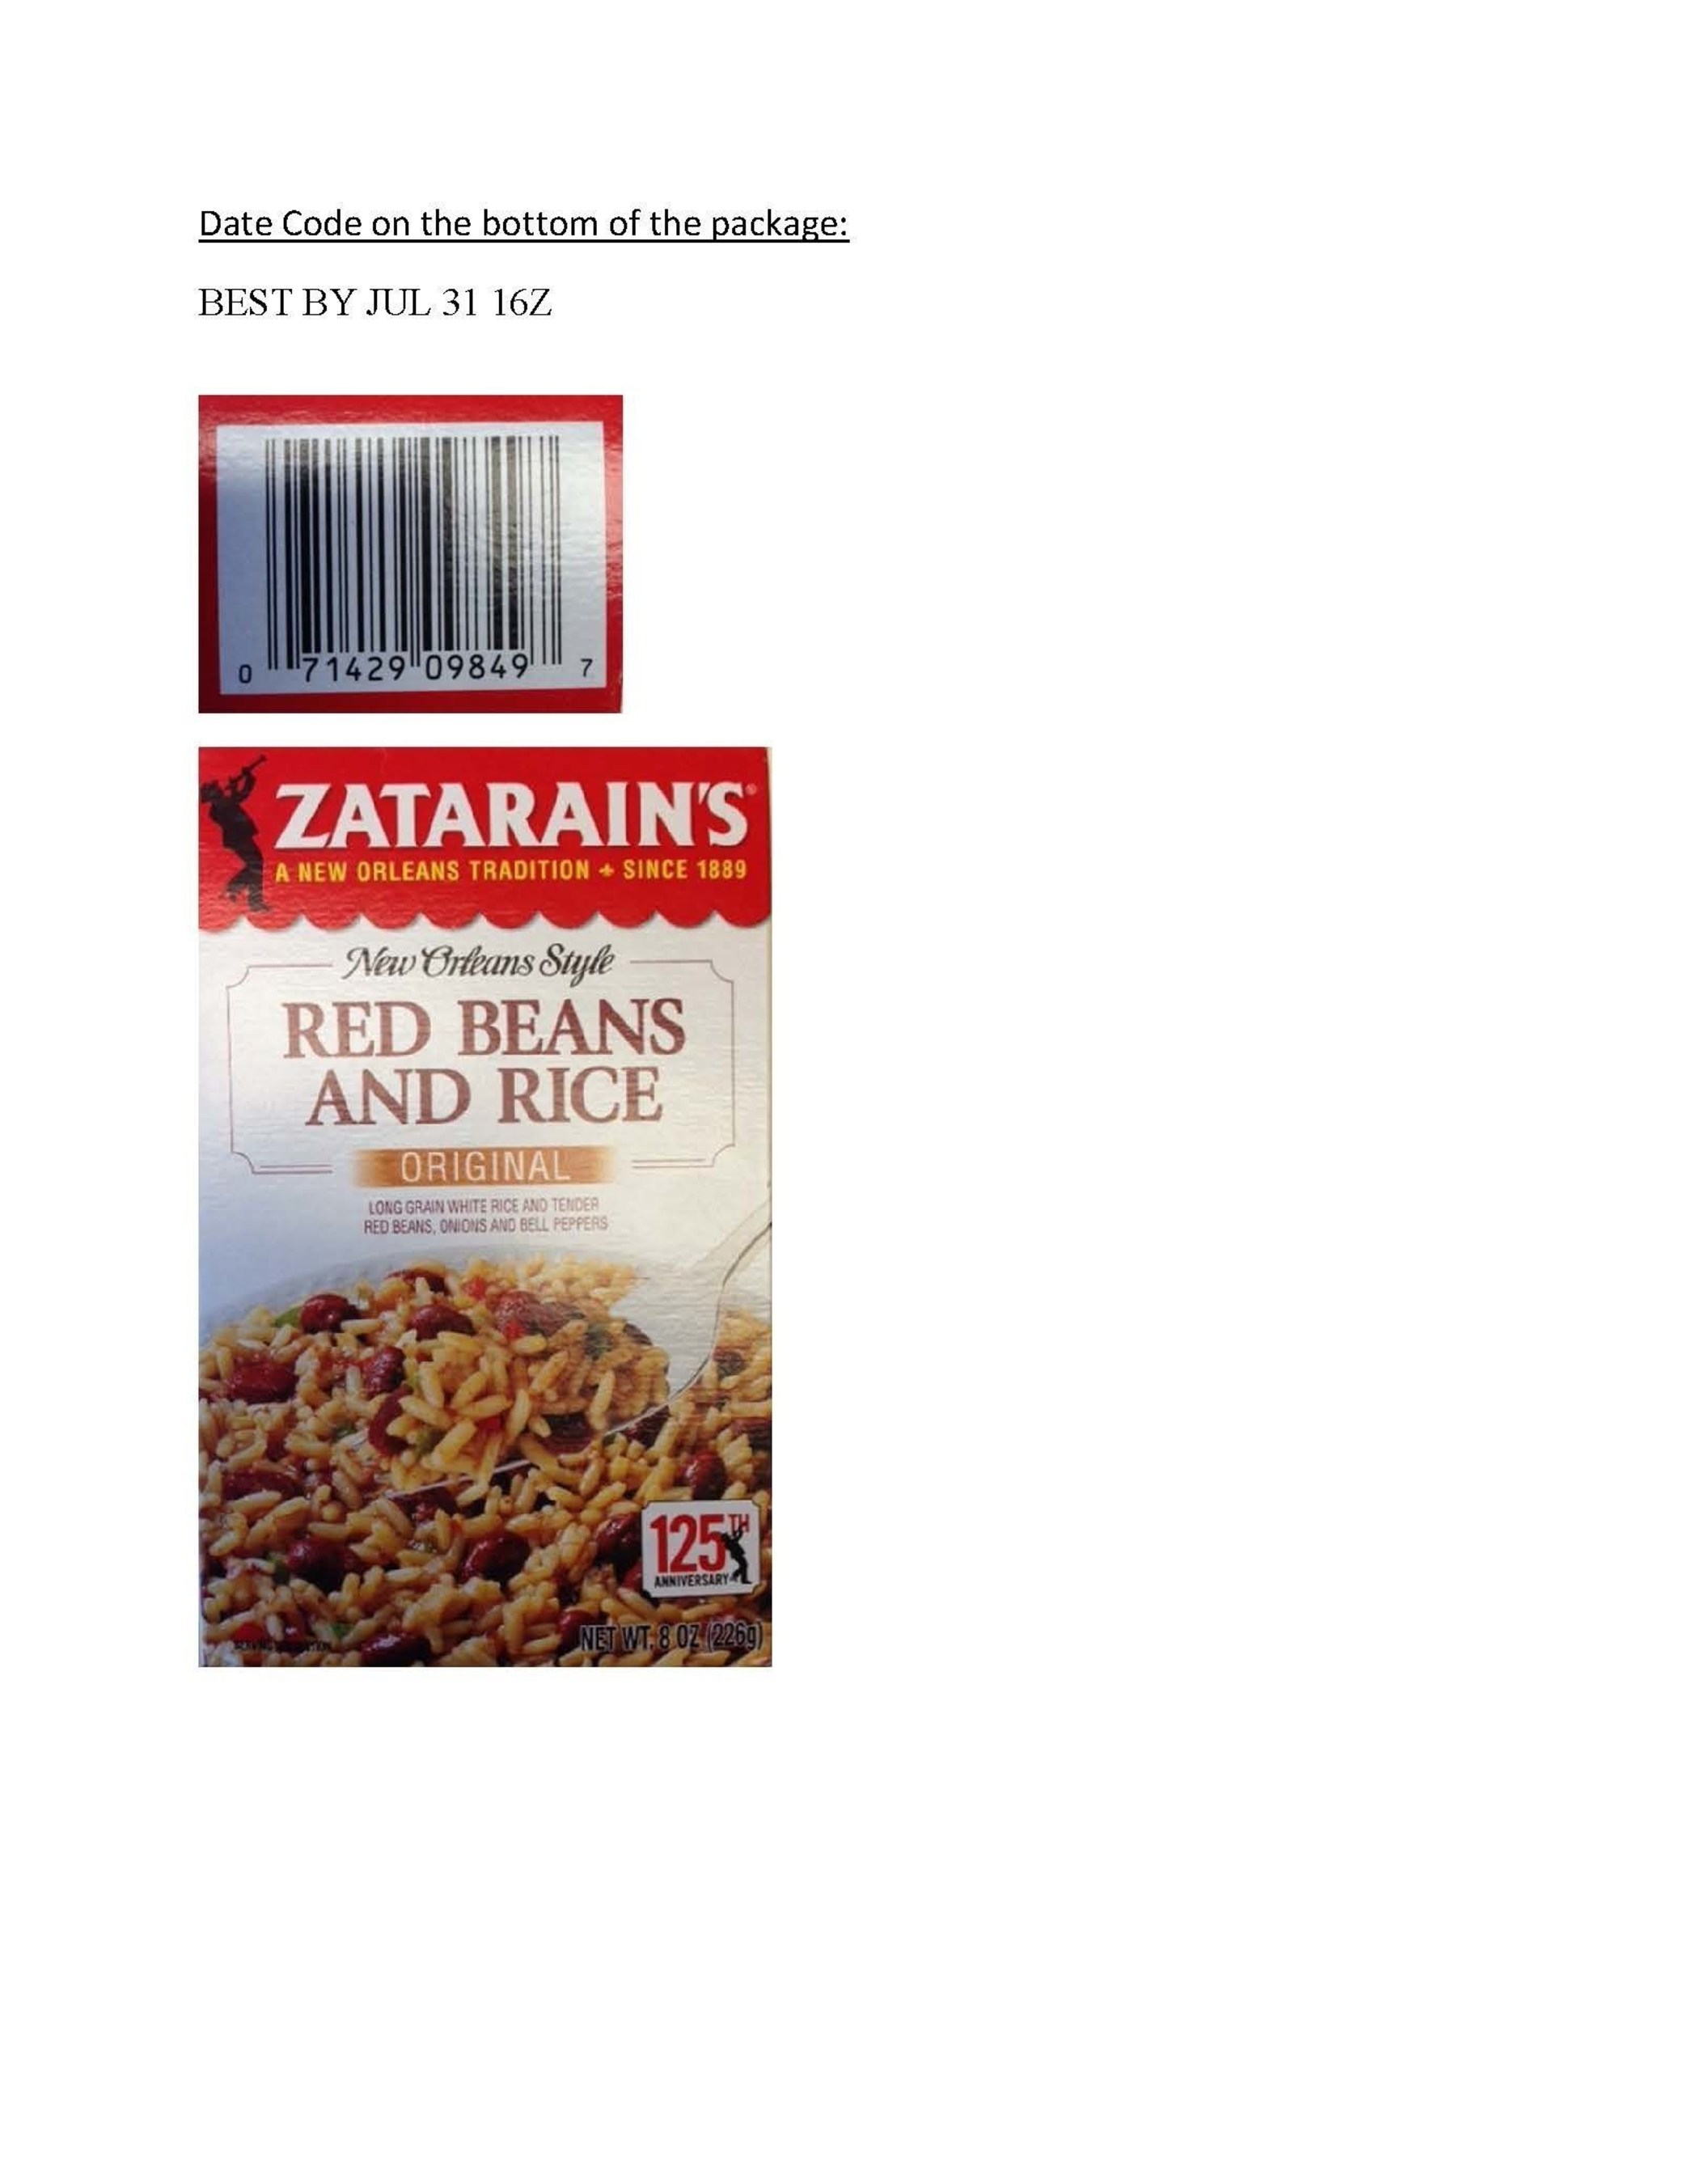 Voluntary Recall Notice for Zatarain's Red Beans and Rice Original due to  Possible Health Risk from Undeclared Ingredients